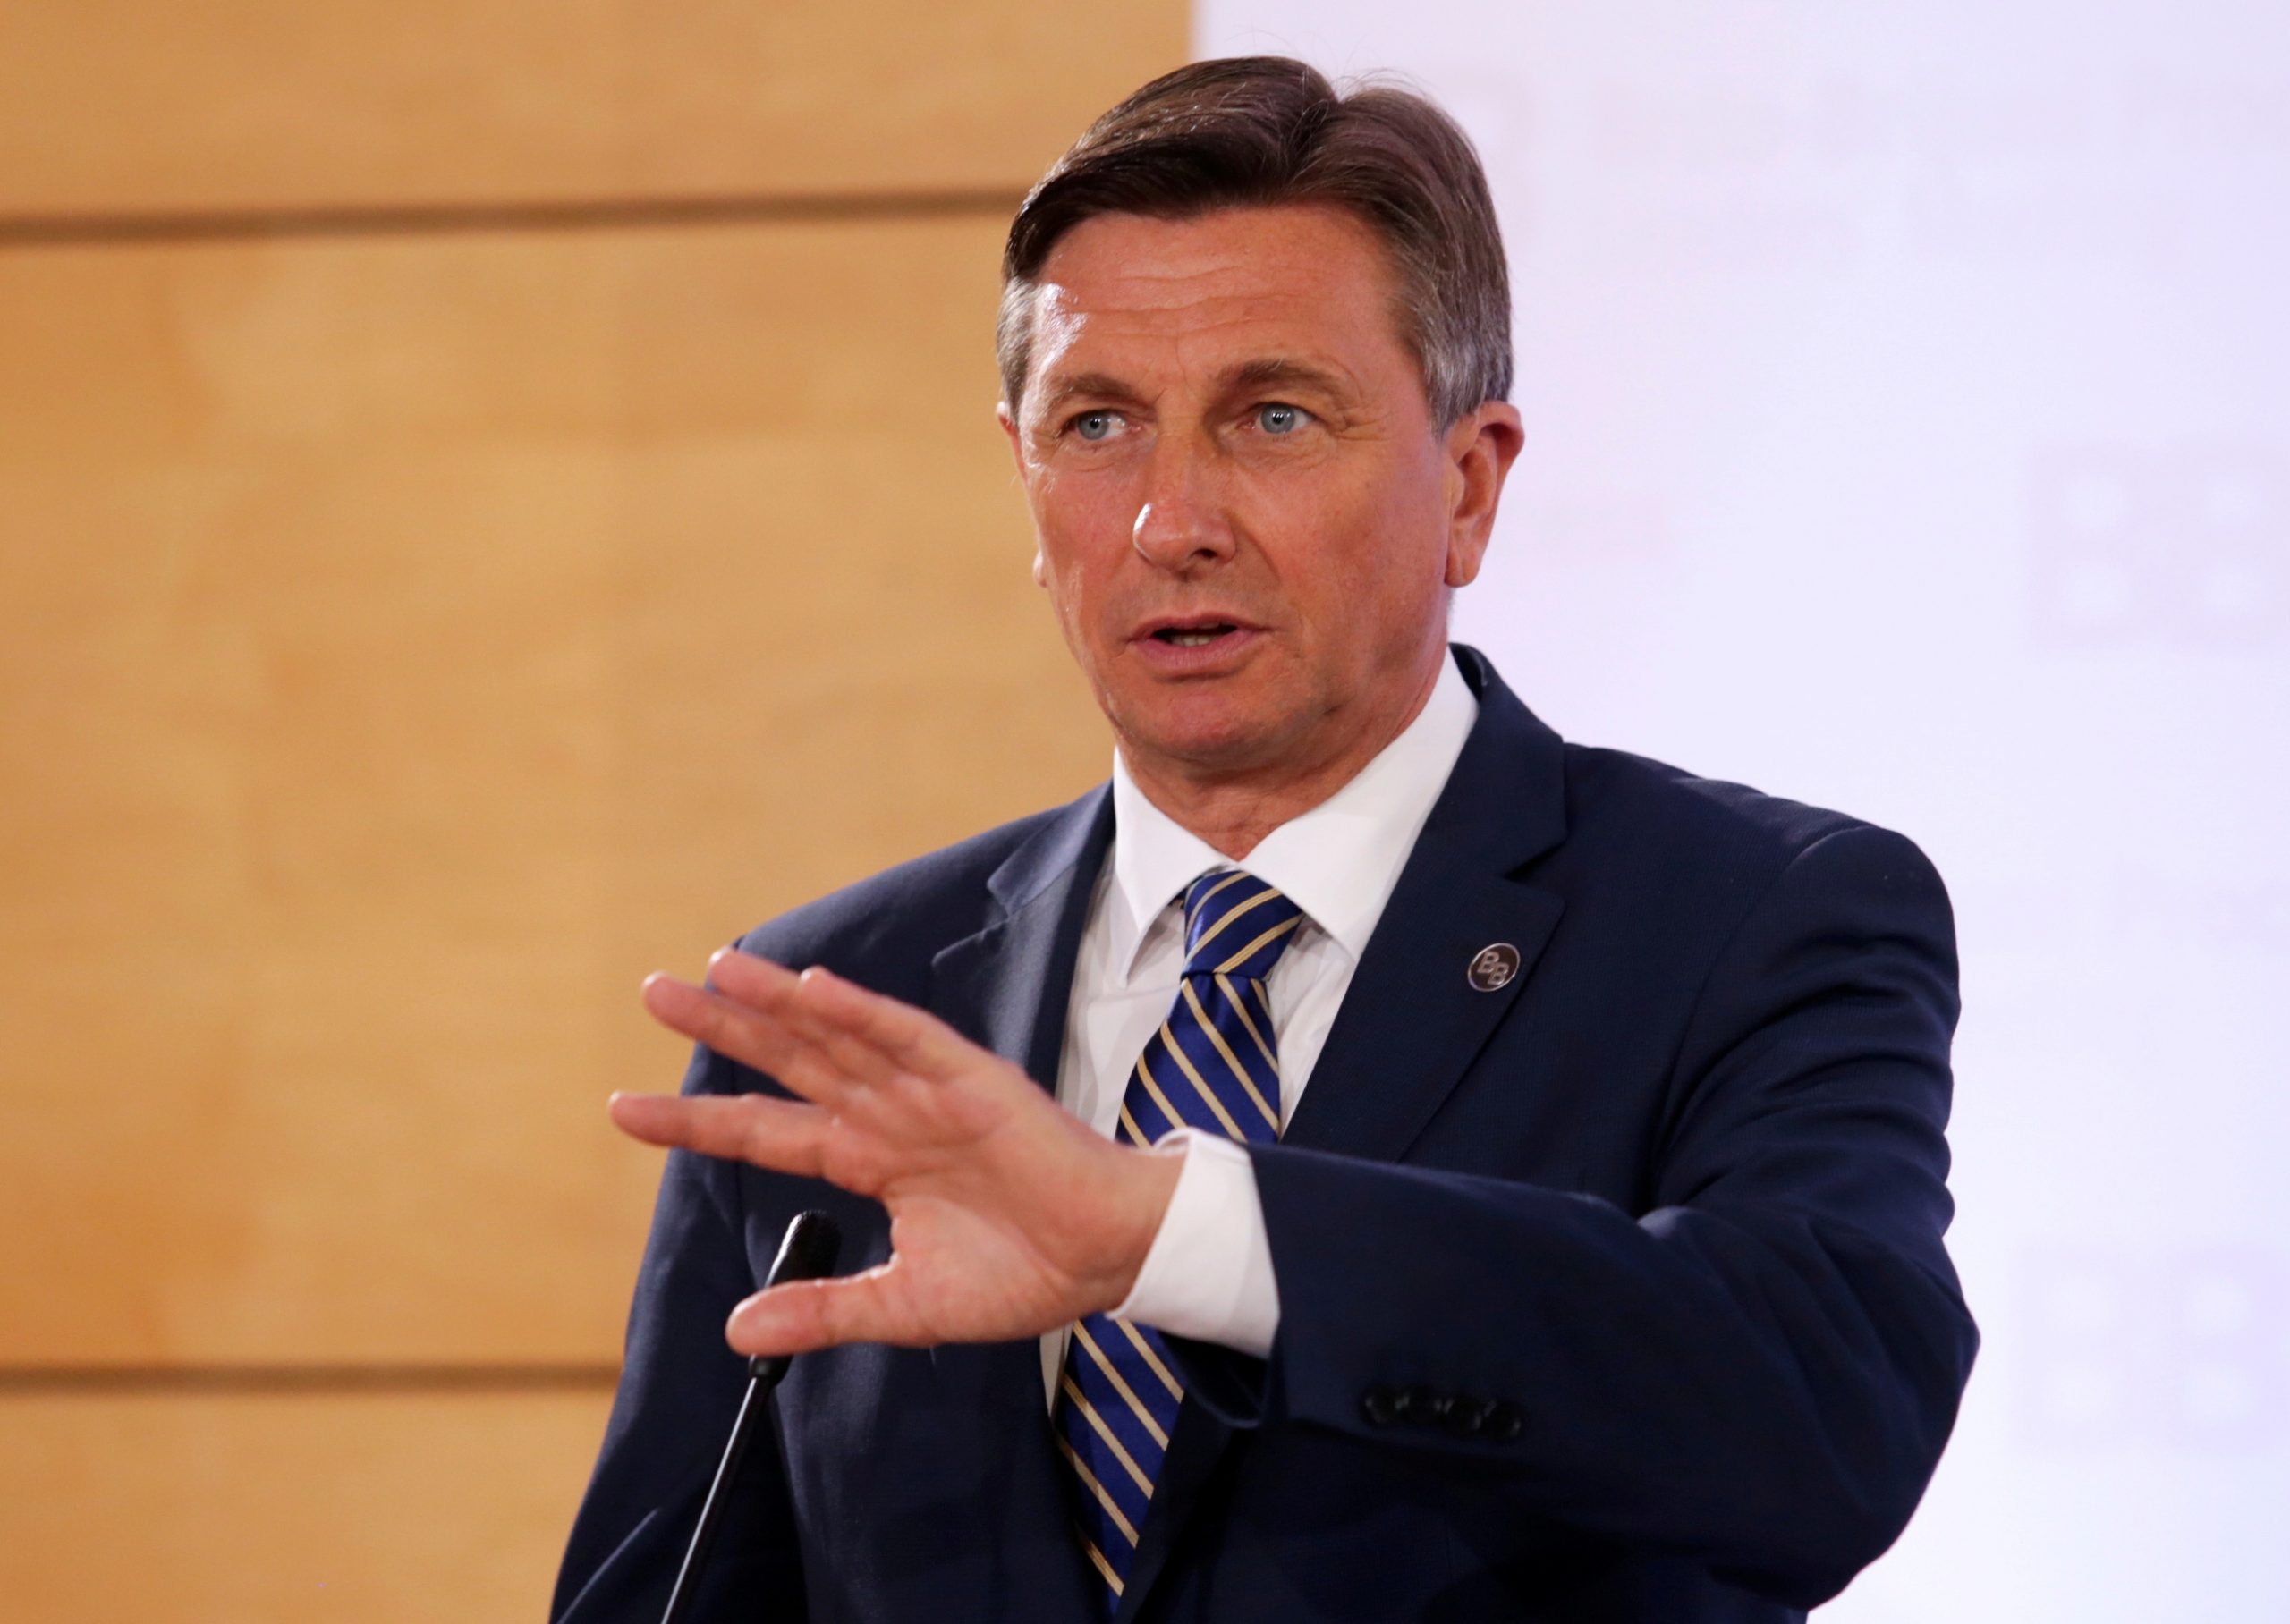 FILE PHOTO: Western Balkan leaders meet in Albania FILE PHOTO: President of Slovenia Borut Pahor speaks during a news conference after the Brdo-Brijuni Process Leaders' Meeting in Tirana, Albania May 9, 2019. REUTERS/Florion Goga/File Photo FLORION GOGA